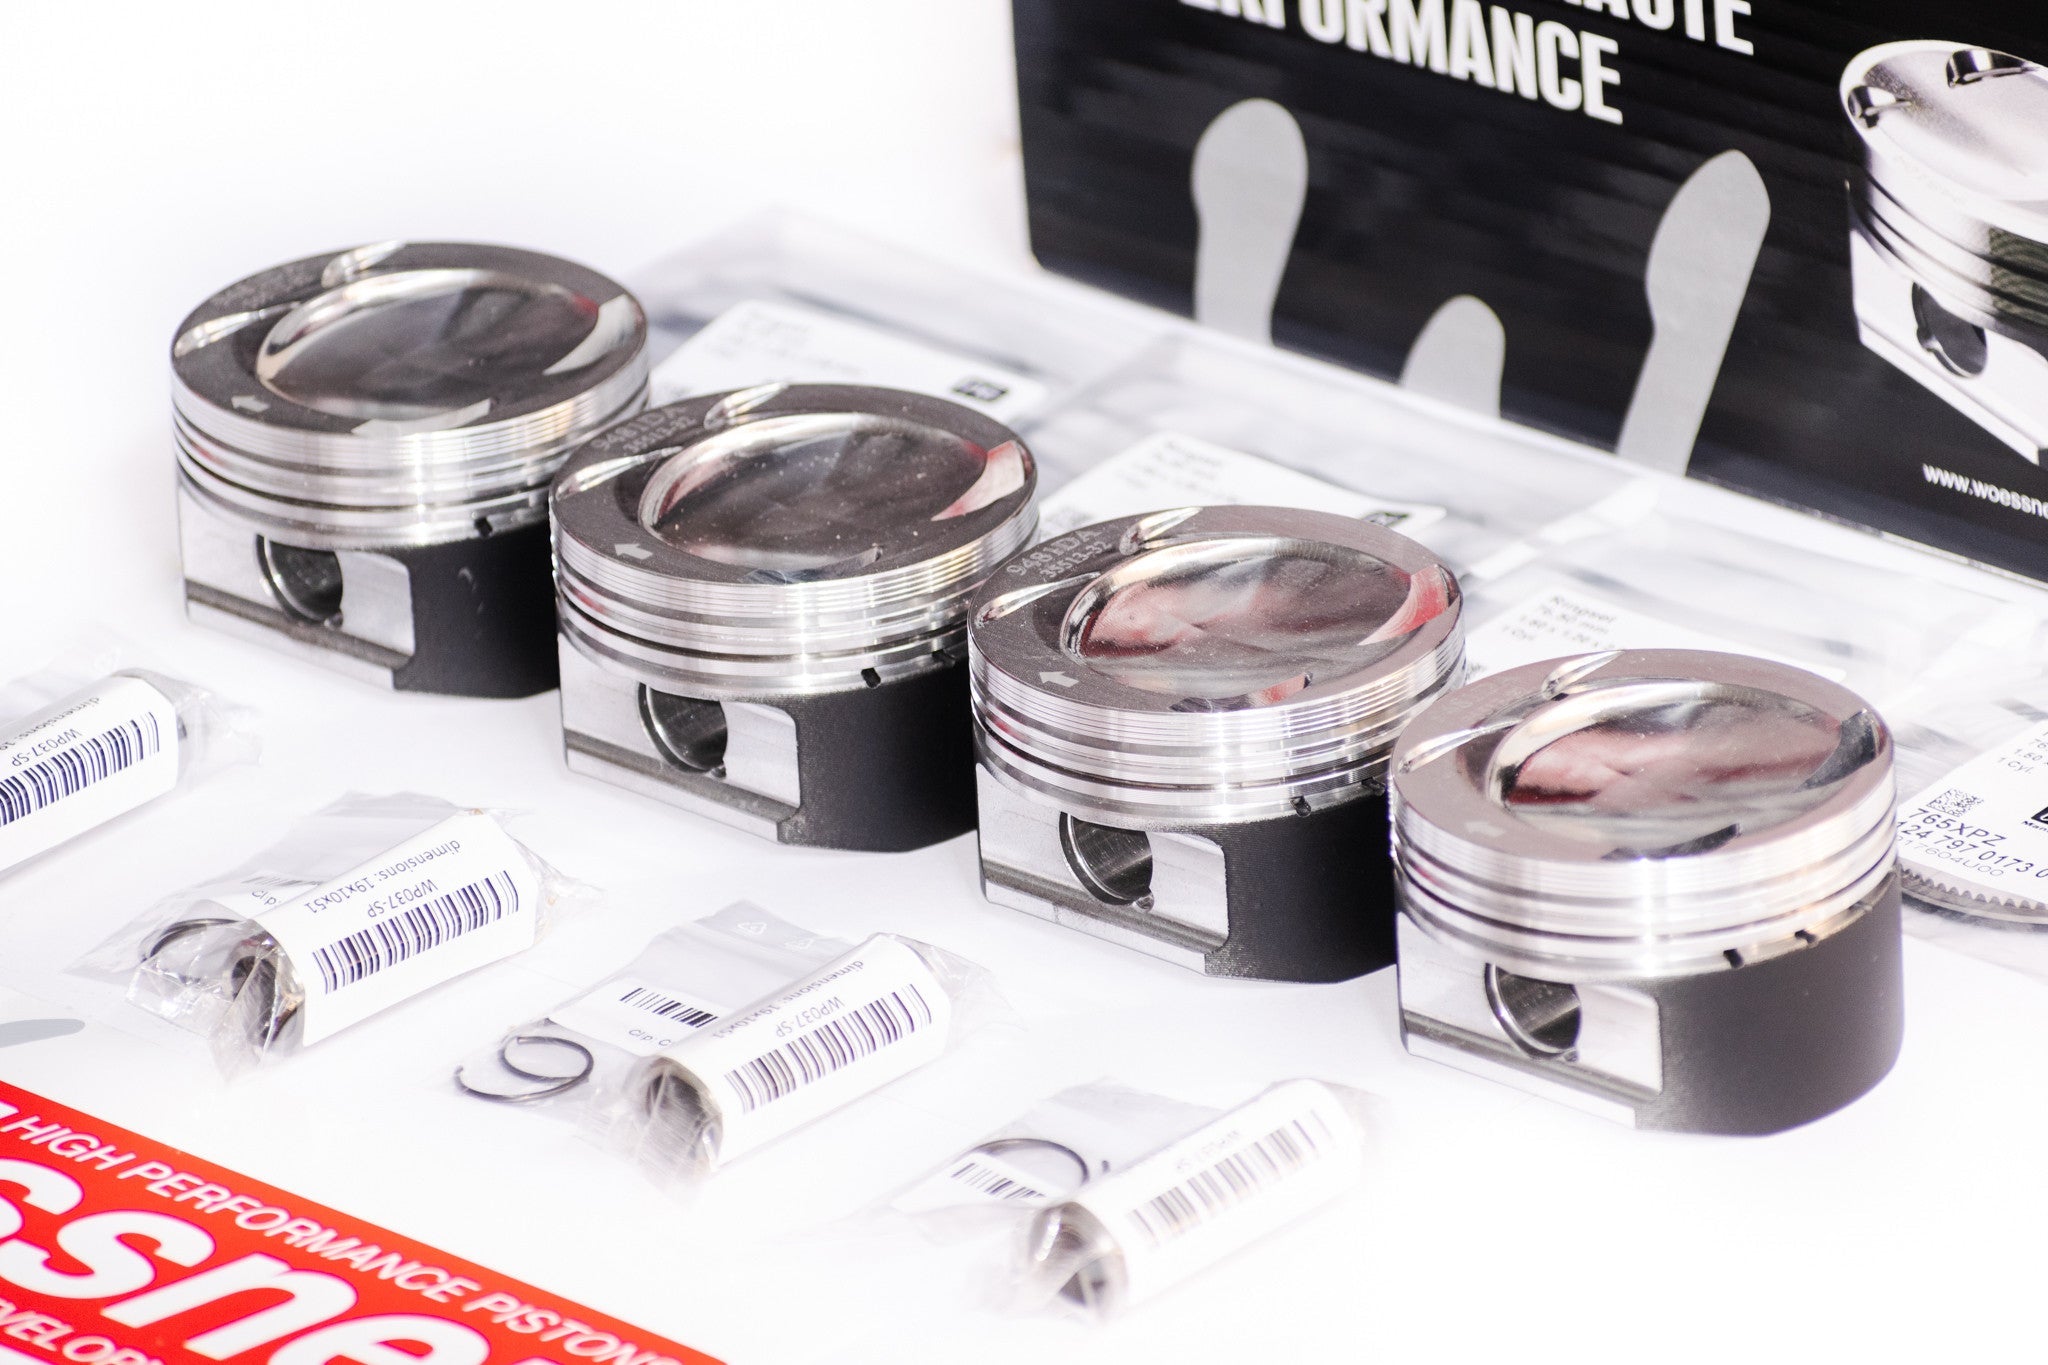 Wossner Forged Pistons for 1.4 TSI EA111 - RTMG Performance